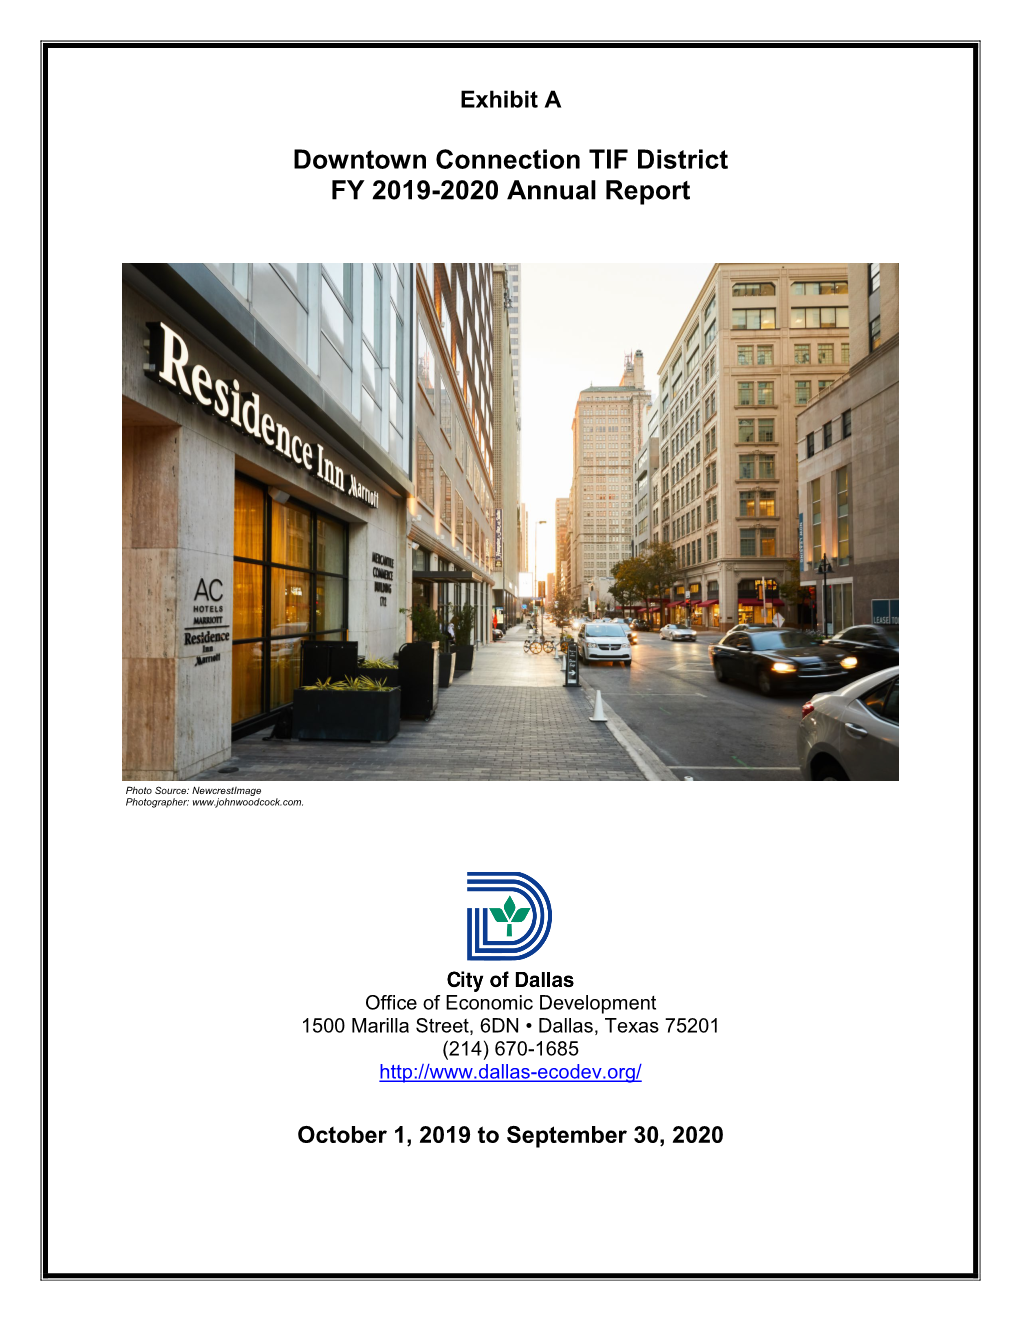 Downtown Connection TIF District Annual Report FY 2019